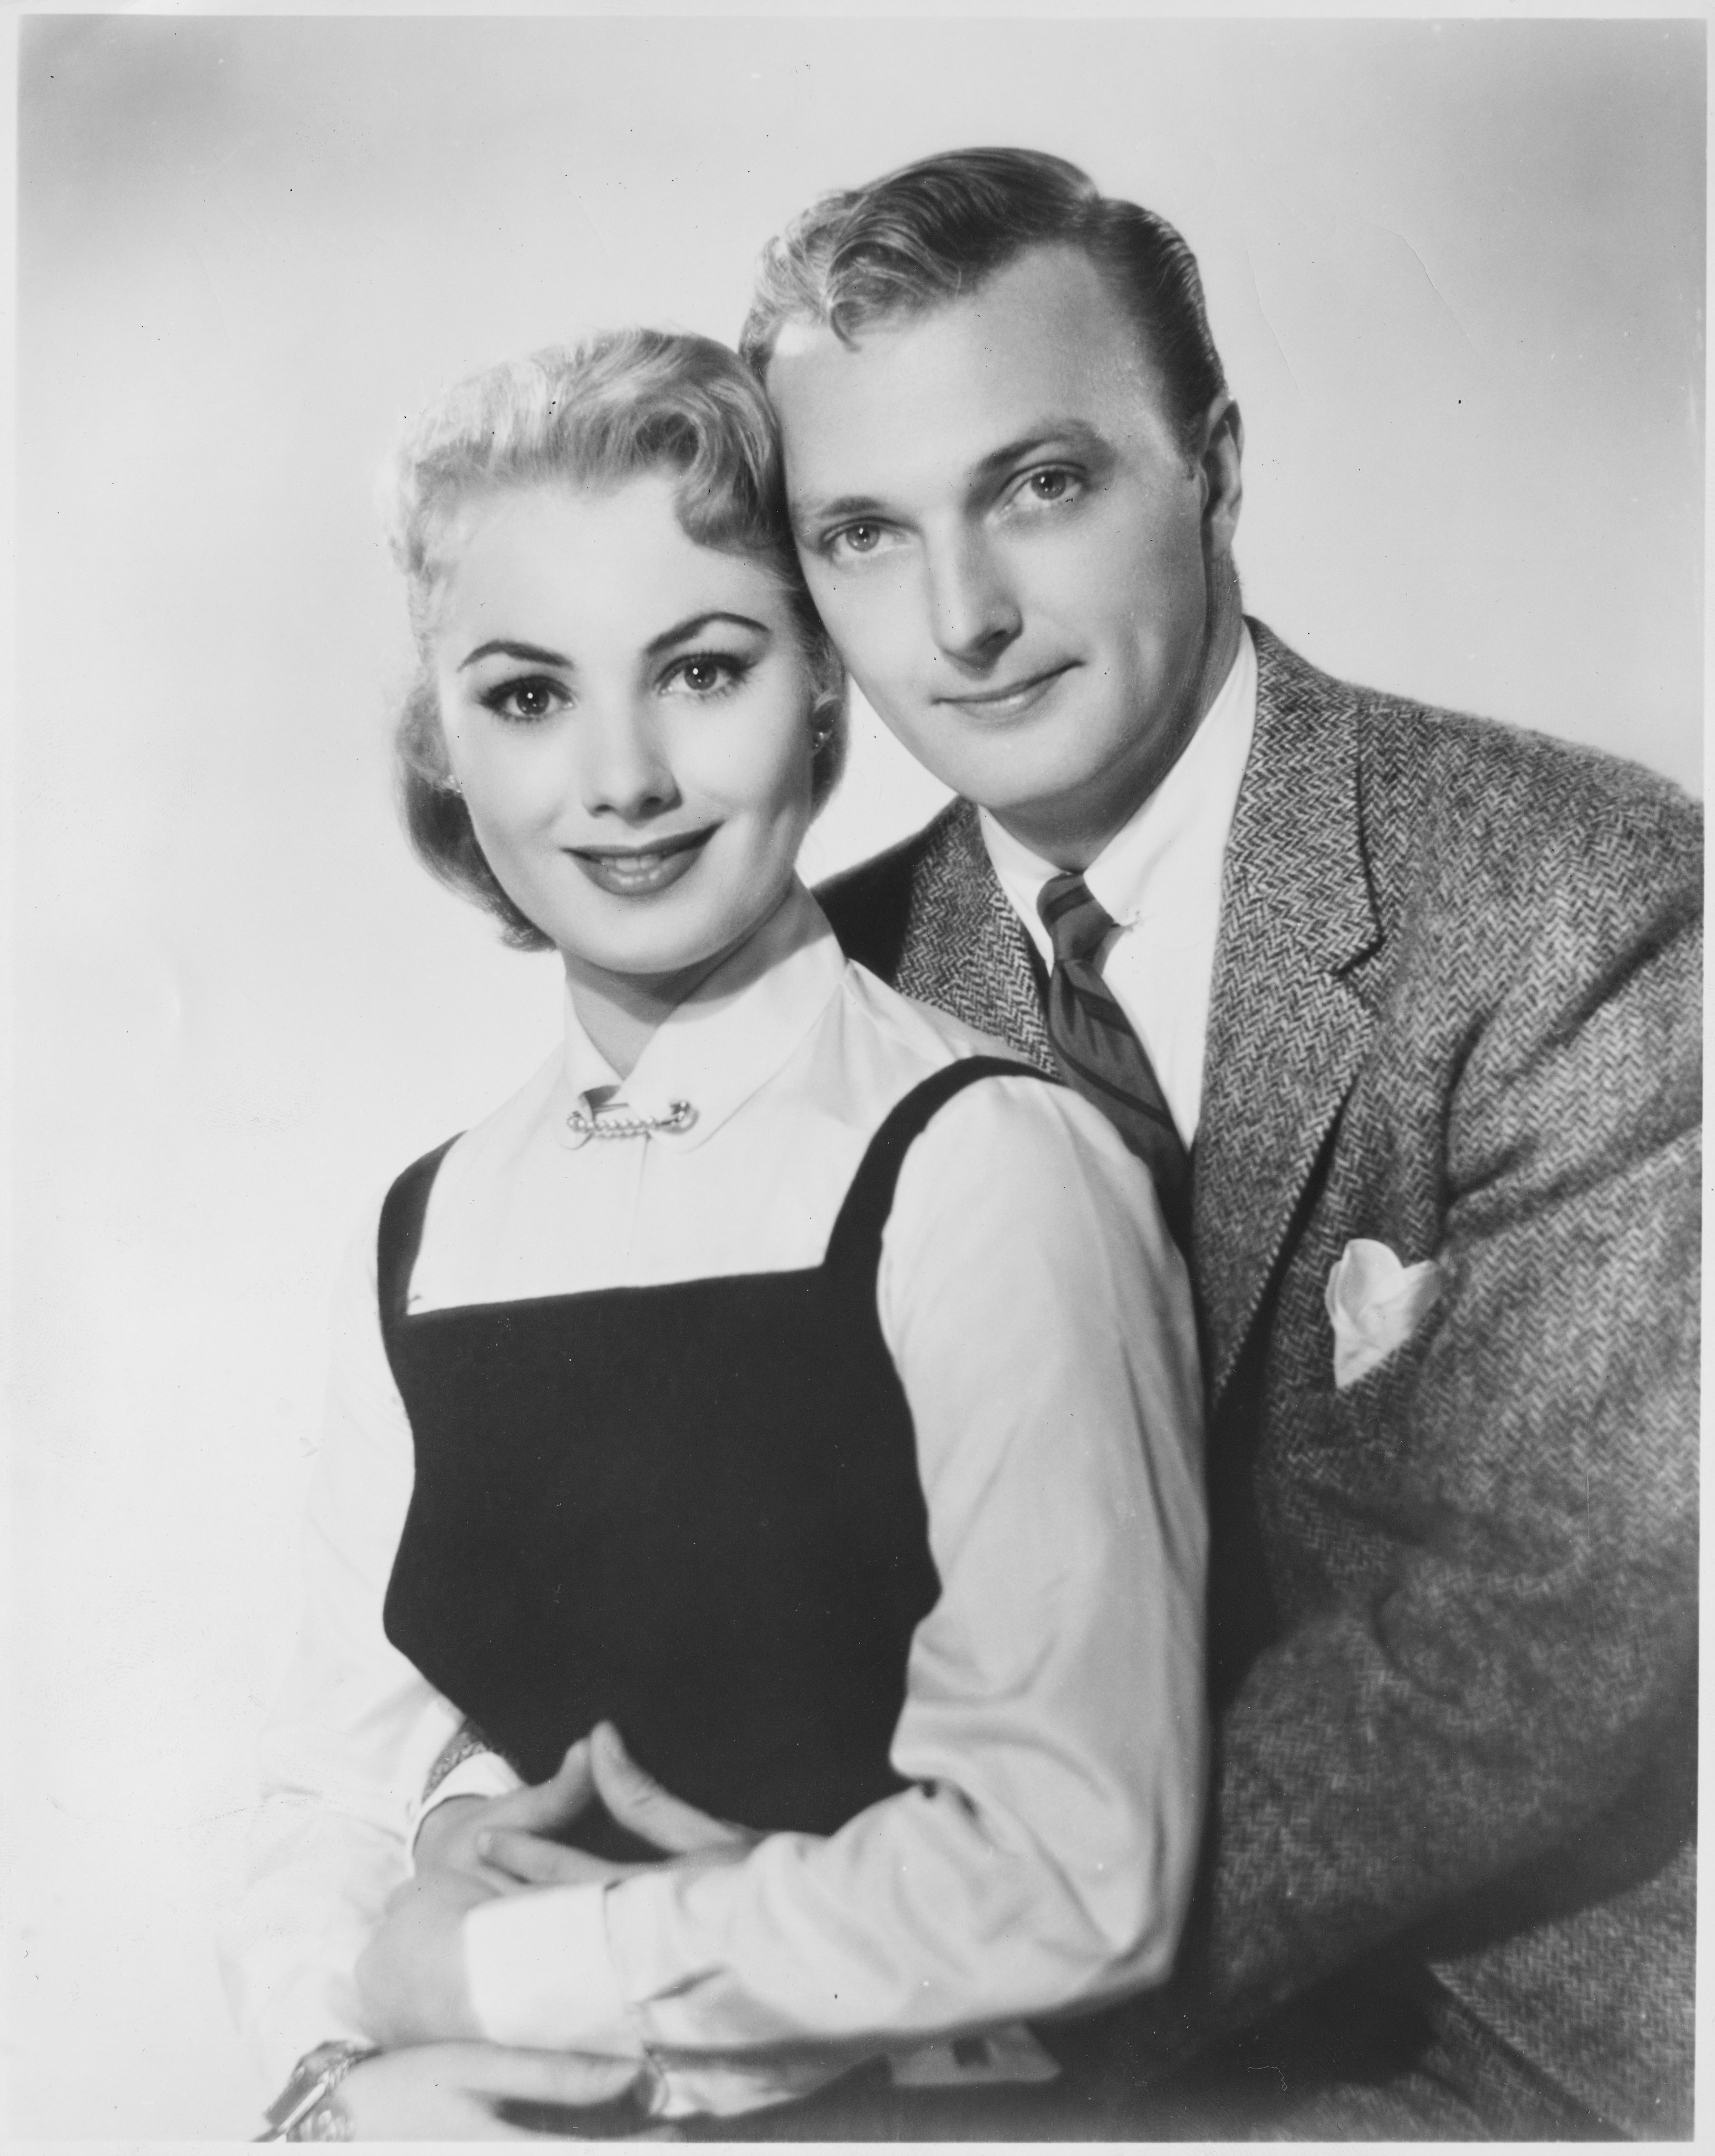 Actors Shirley Jones and Jack Cassidy pictured on January 1, 1950 | Source: Getty Images